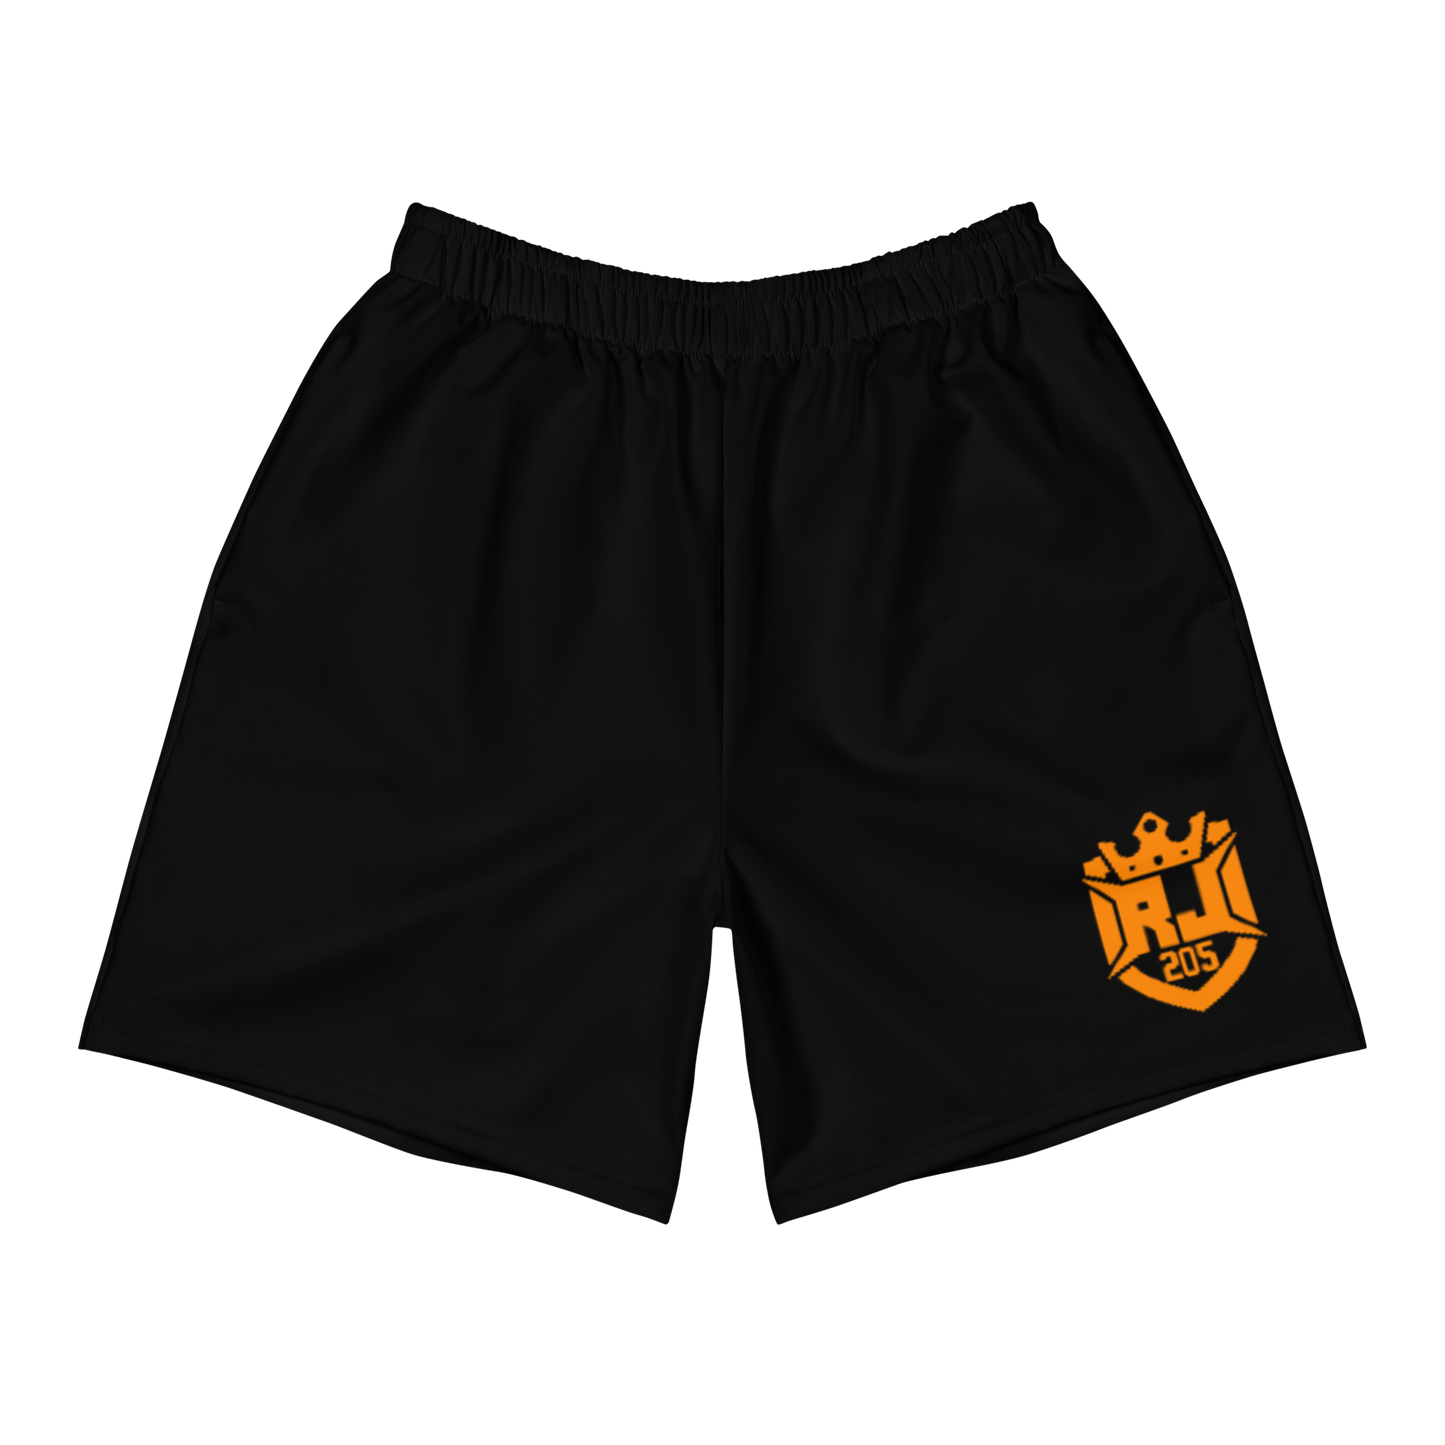 RJ PERRY ATHLETIC SHORTS